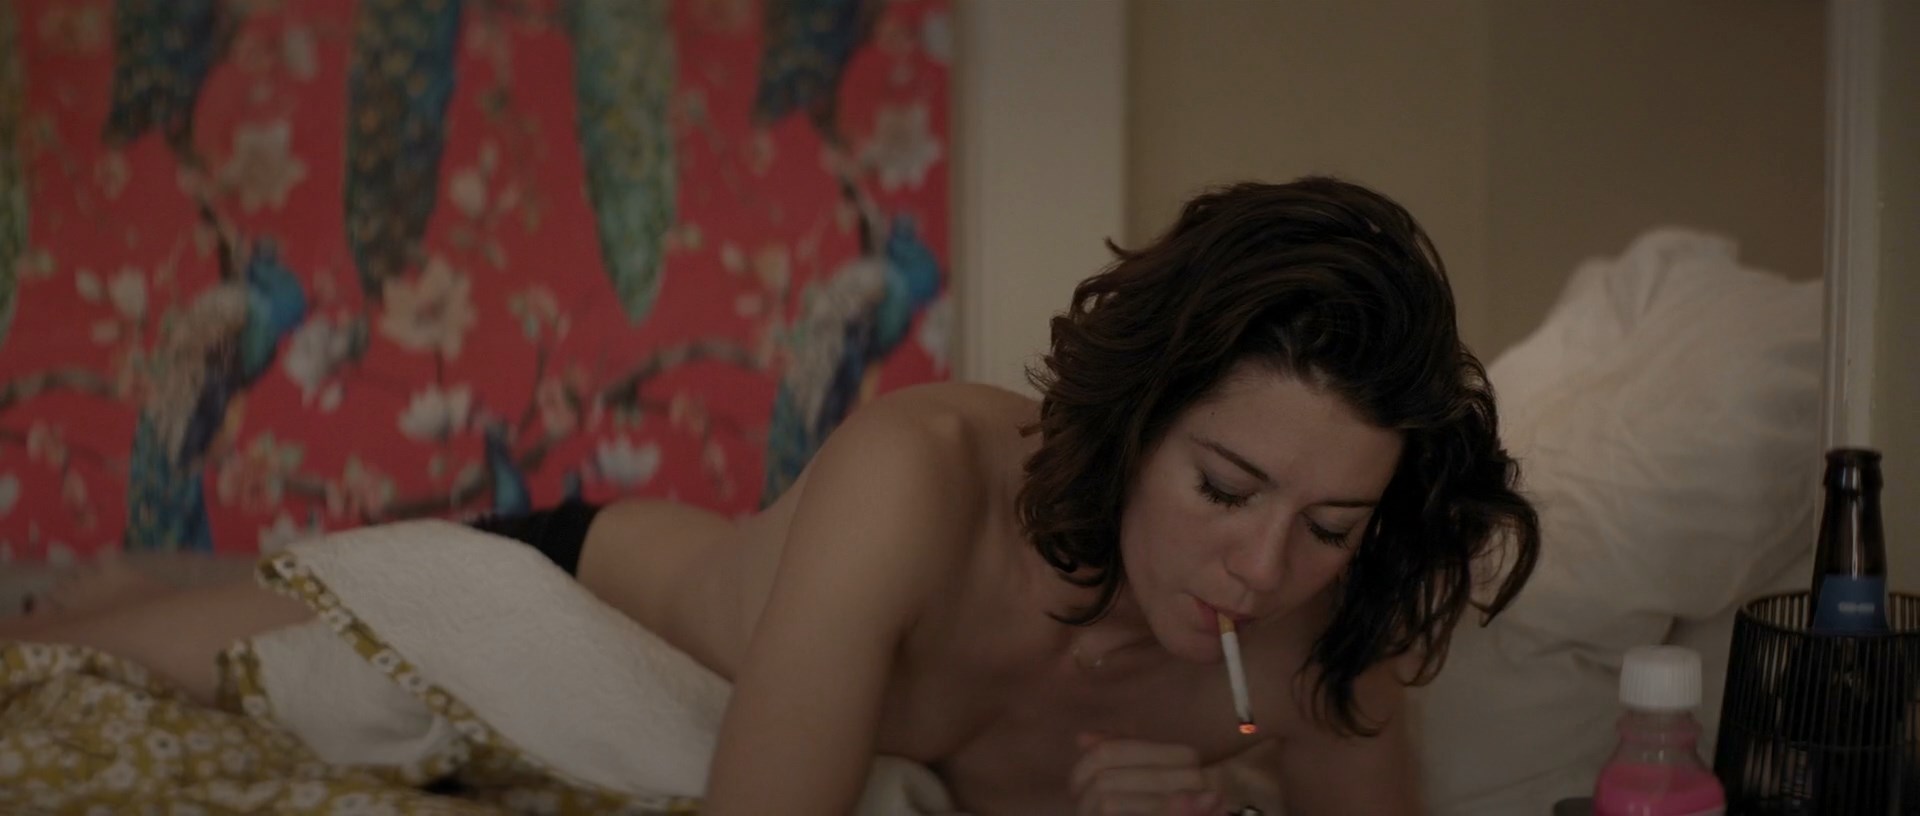 Mary elizabeth winstead naked pictures